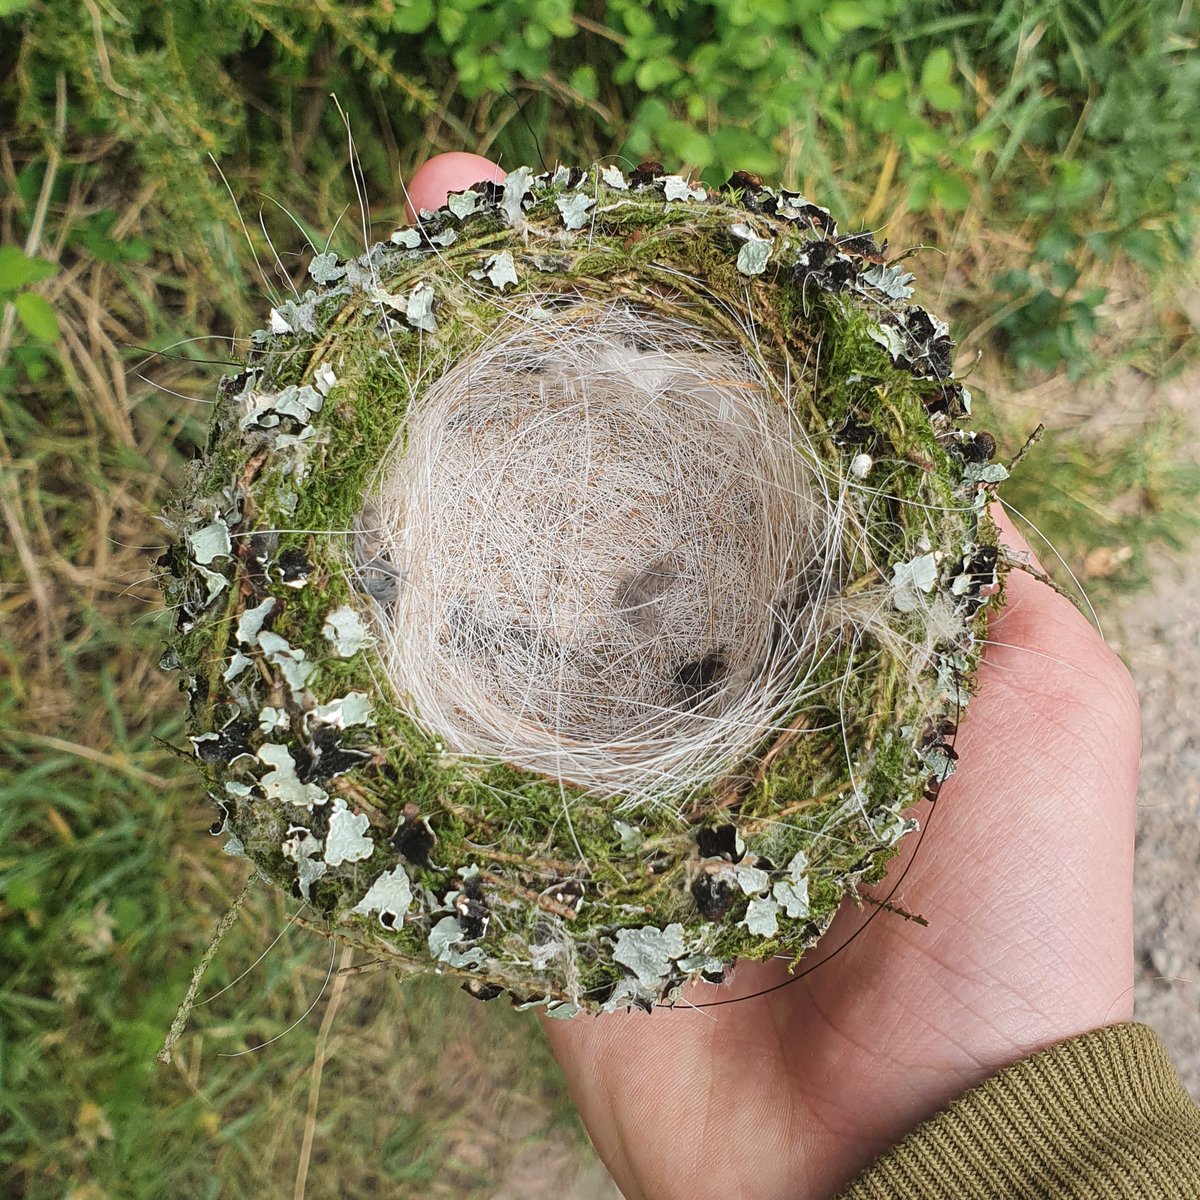 Came across this fallen Chaffinch nest, fortunately fallen before any eggs laid it seems. Absolutely gorgeous nests